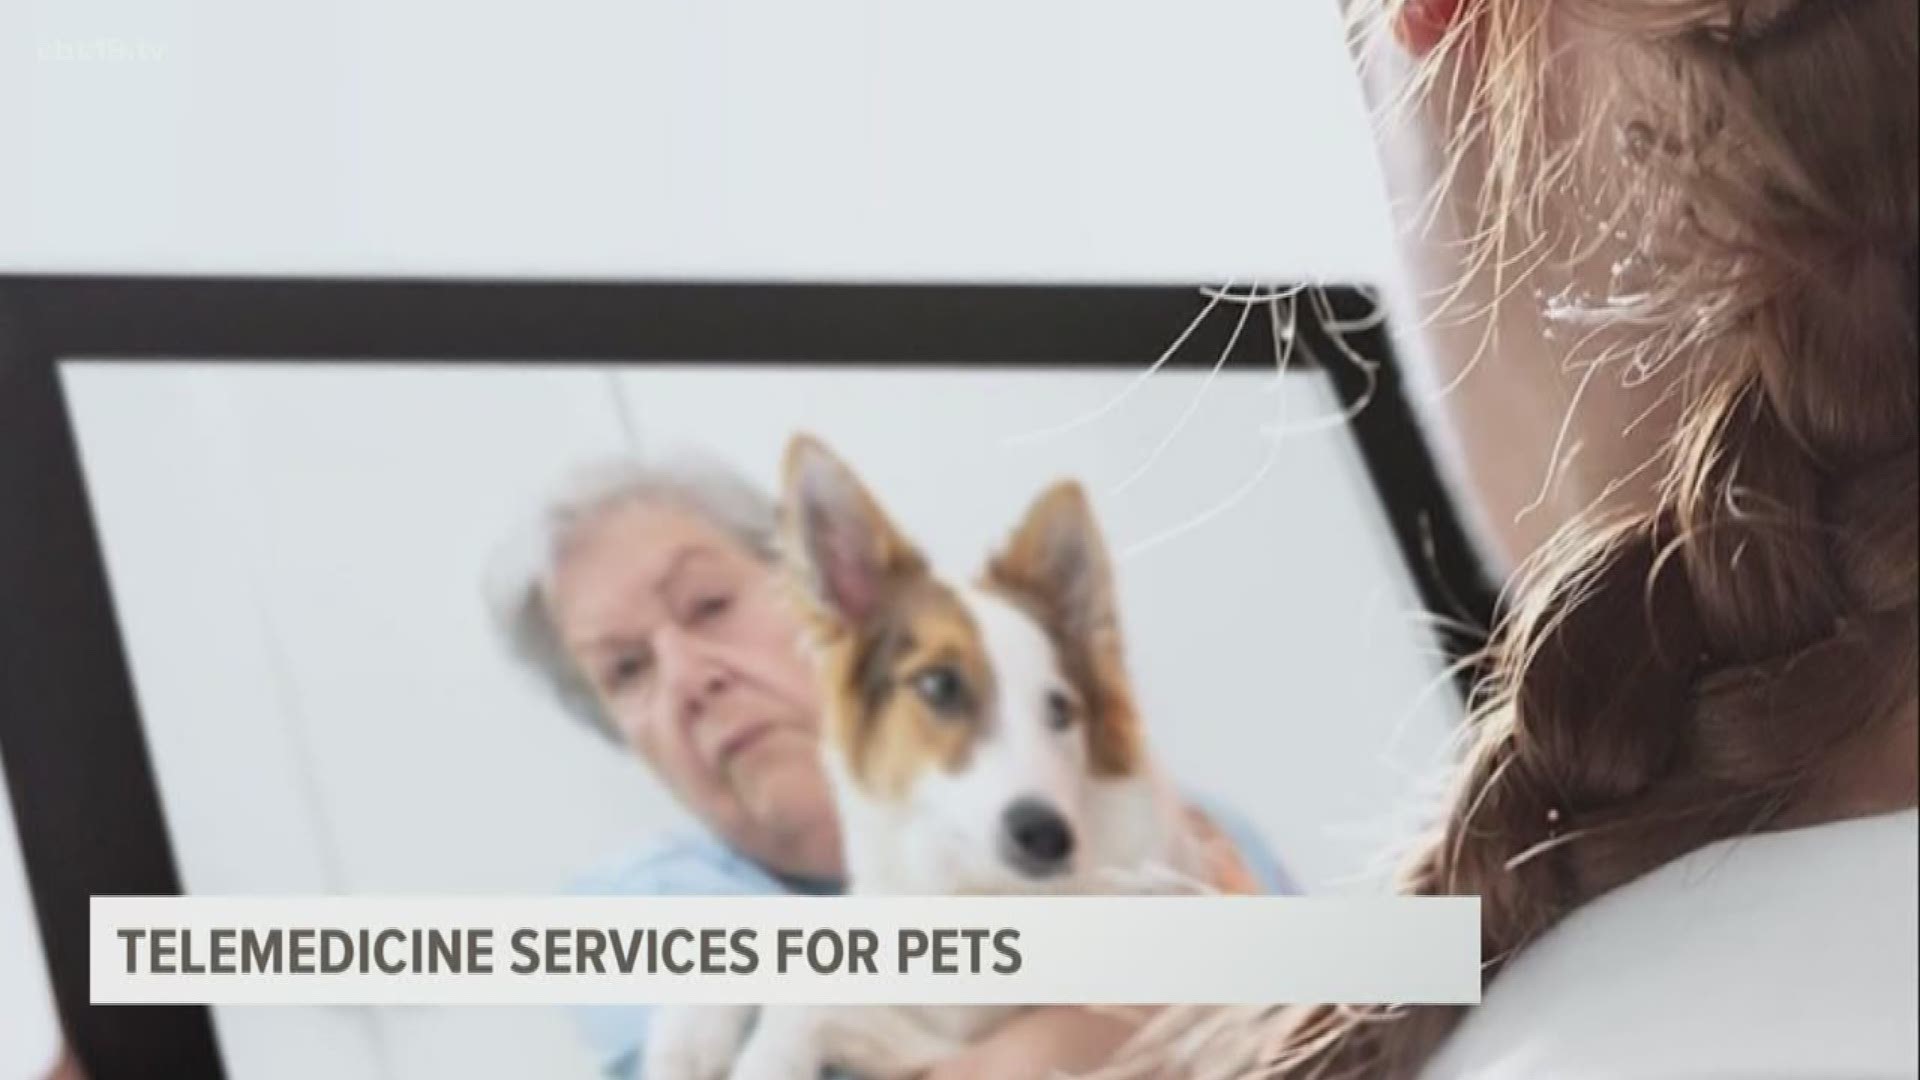 Renee Smith at Lindale Veterinary Clinic says telemedicine has become a convenient way for owners to connect with veterinarians about their pet's health.